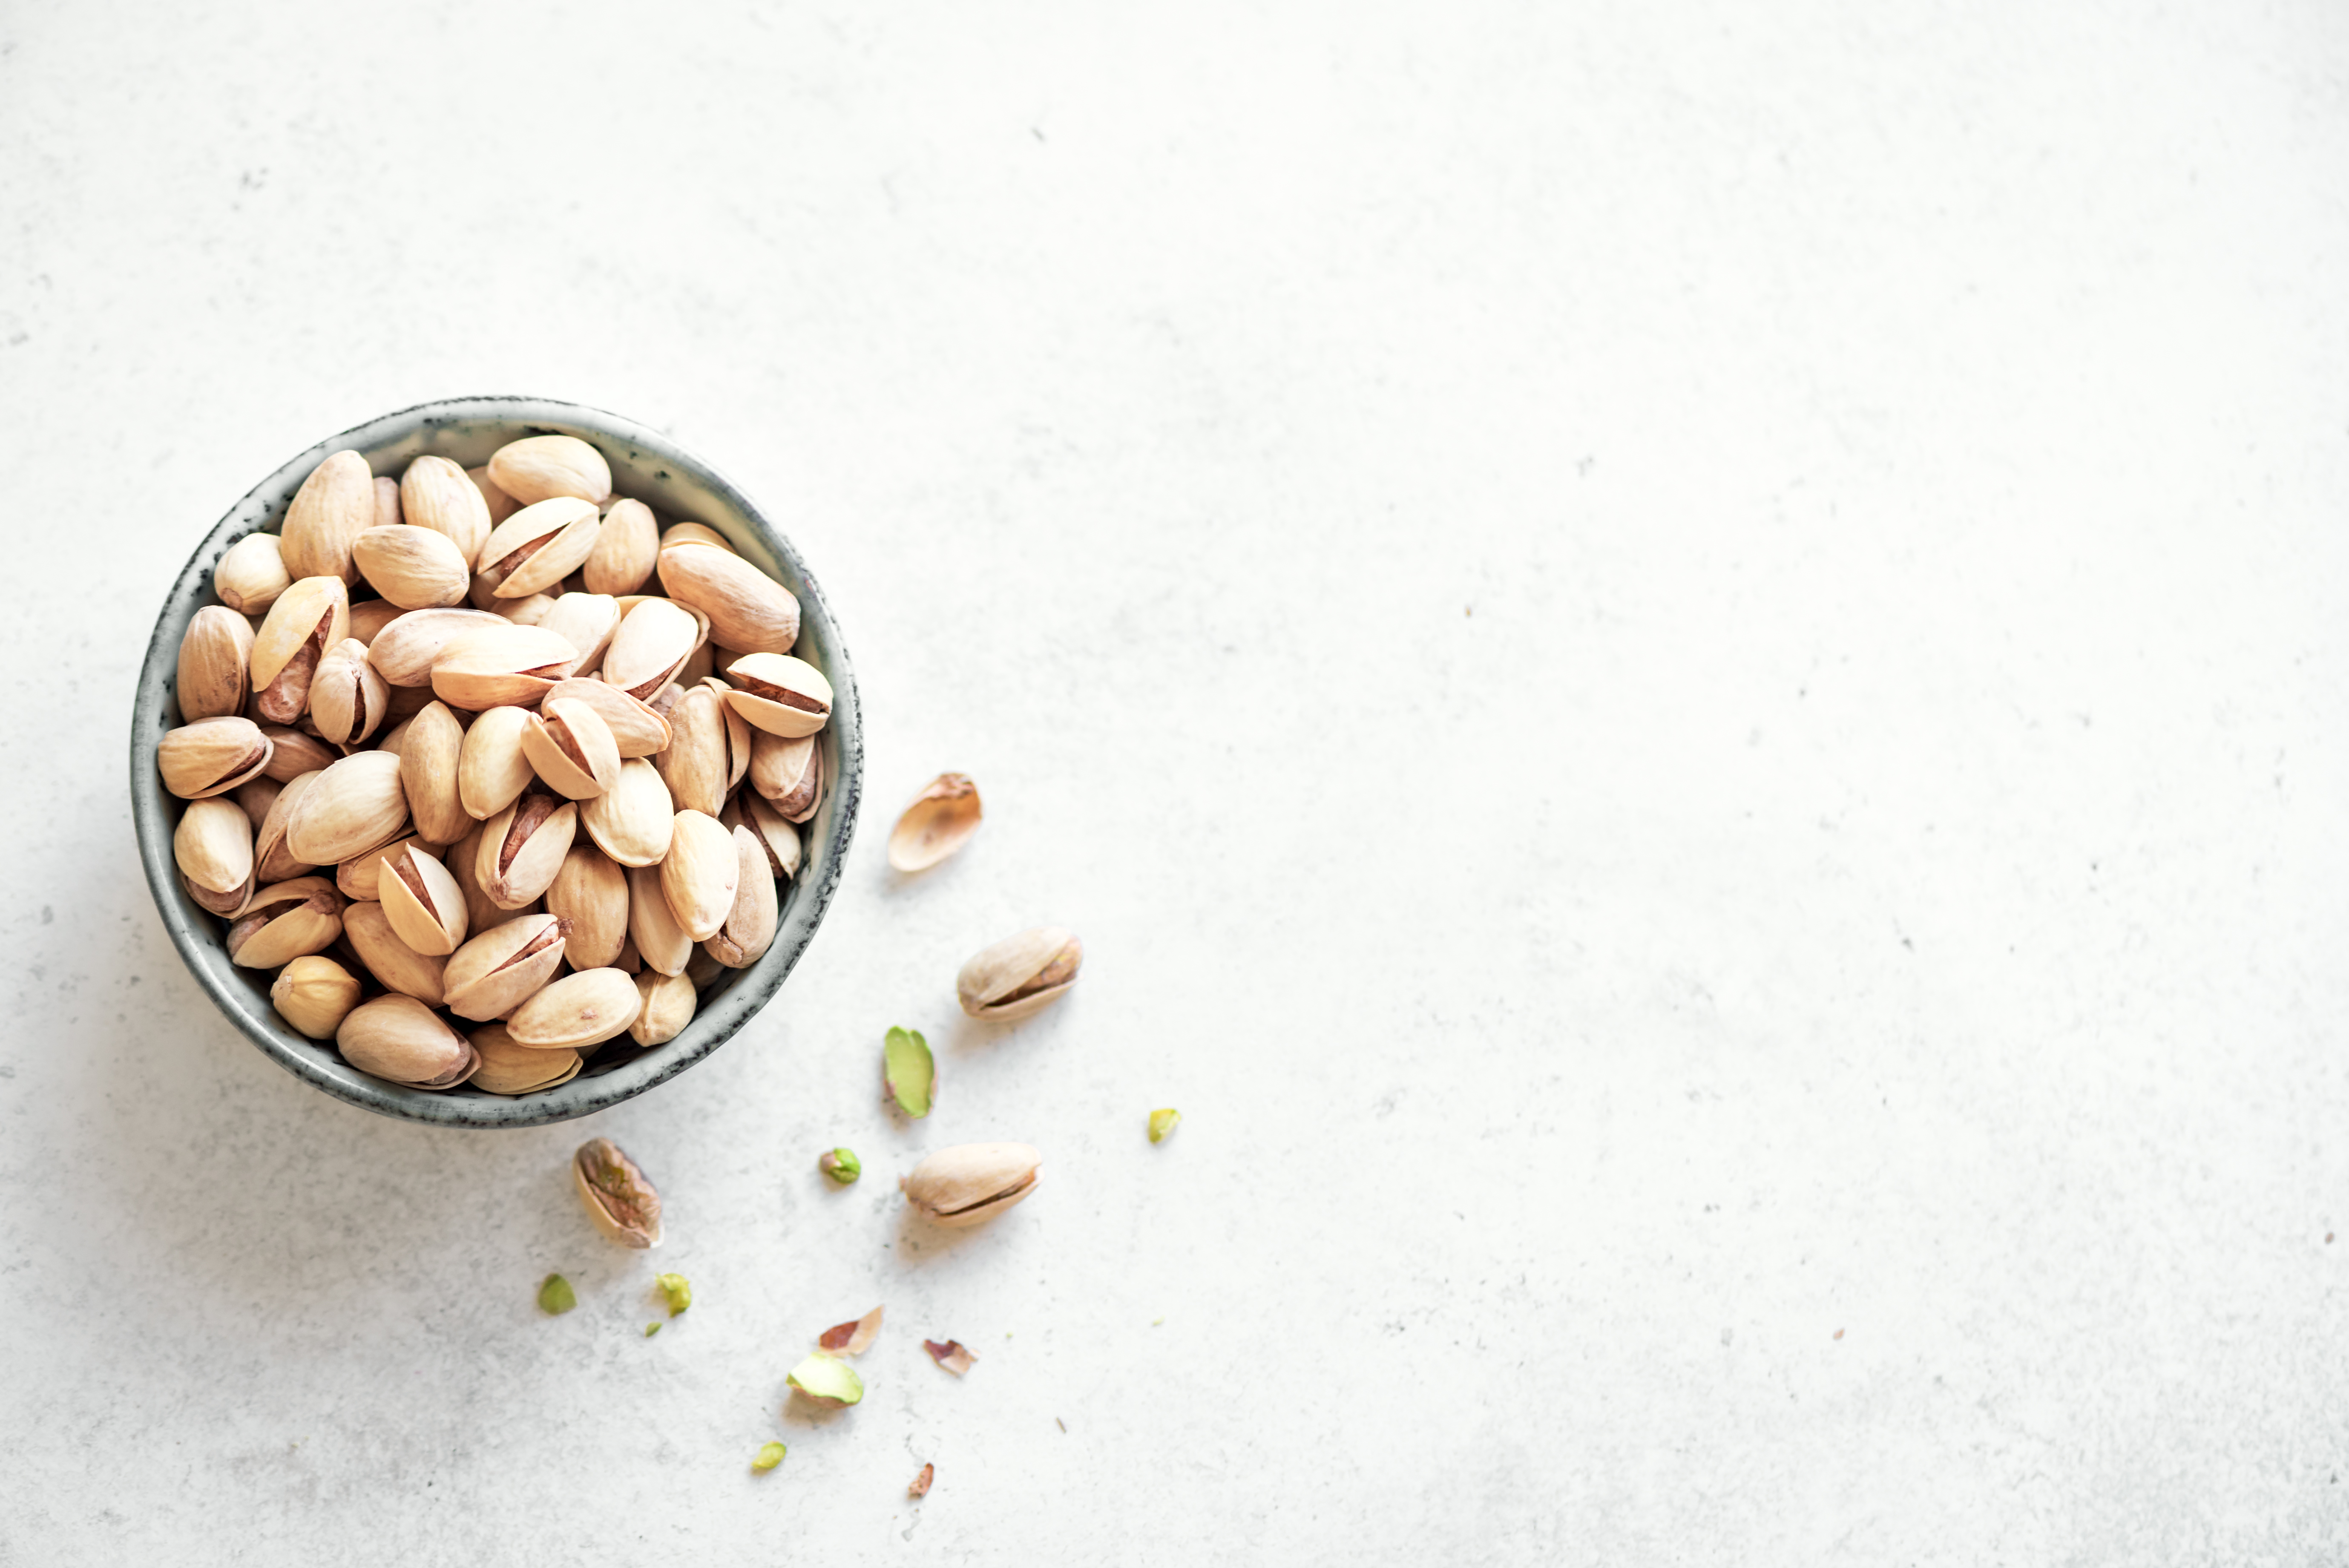 How to Make a Bowl Perfect for Serving Pistachio Nuts